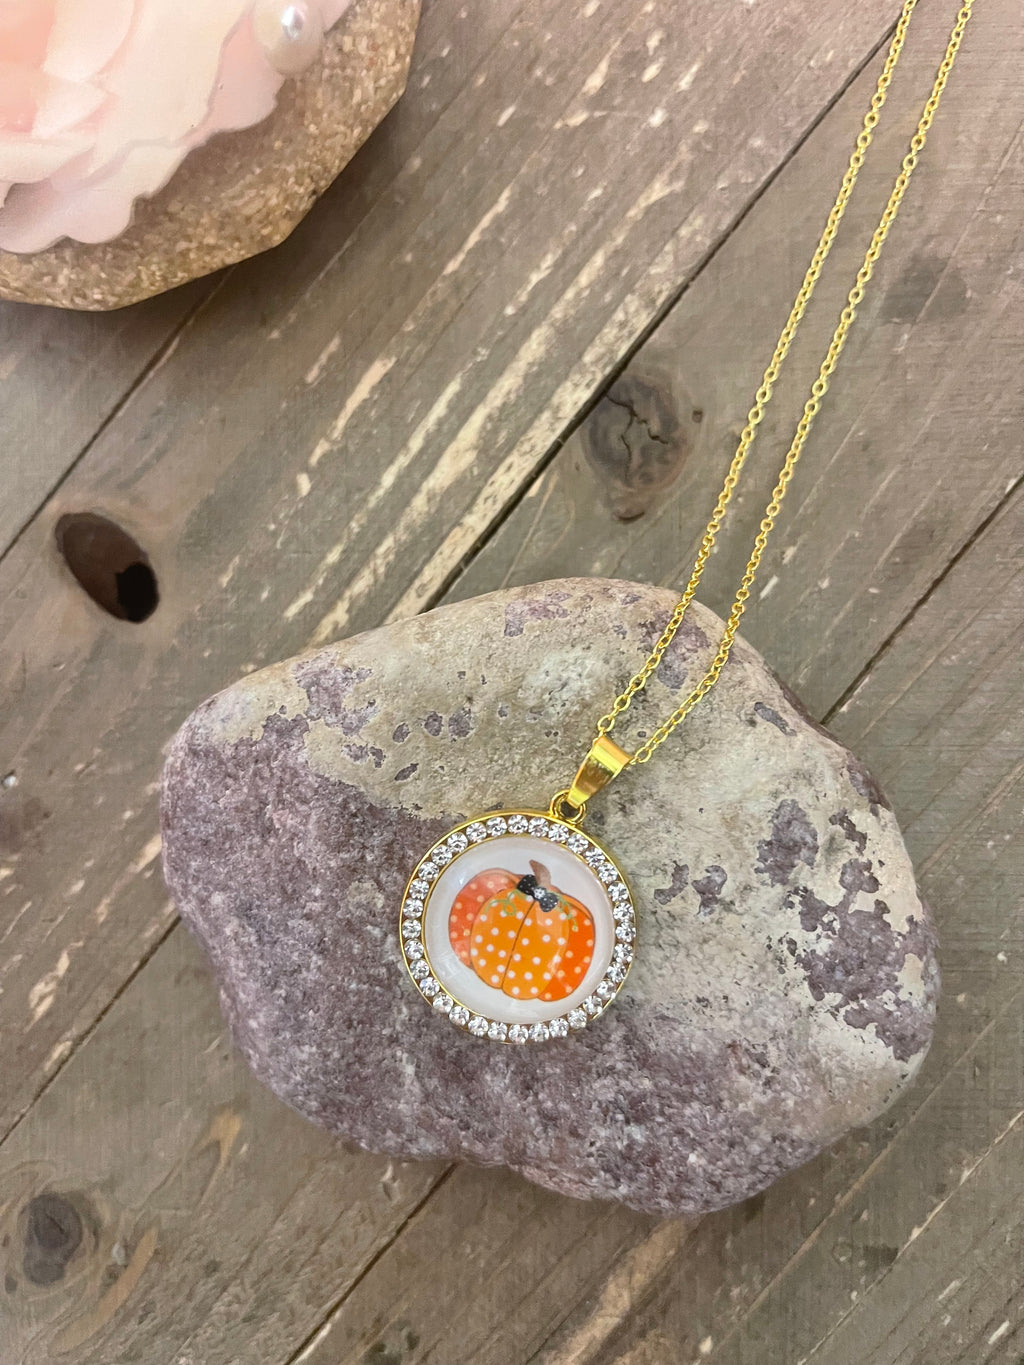 Polka dot  Pumpkin Cabochon Pendant on a Gold chain Necklace